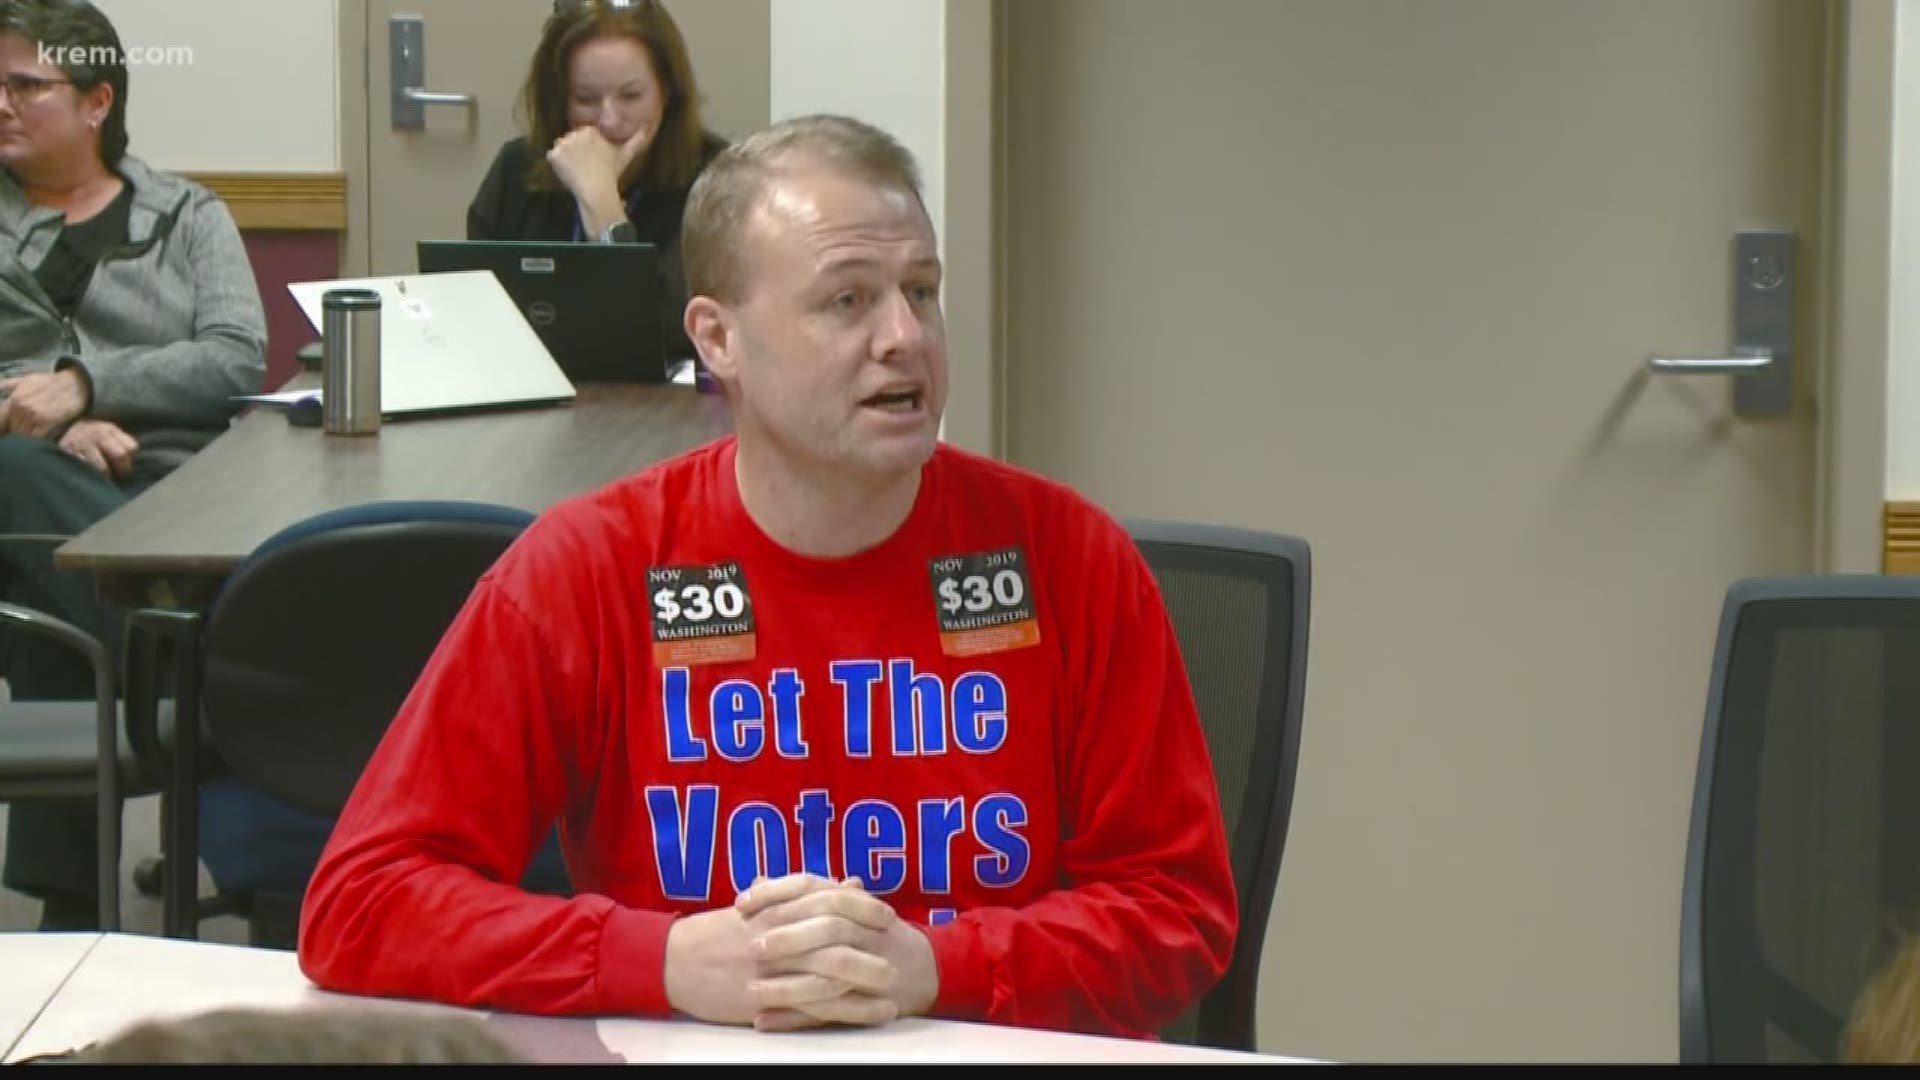 Political activist Tim Eyman interrupted a Spokane city committee meeting to comment on a potential resolution opposing state measure I-976, which he proposed.